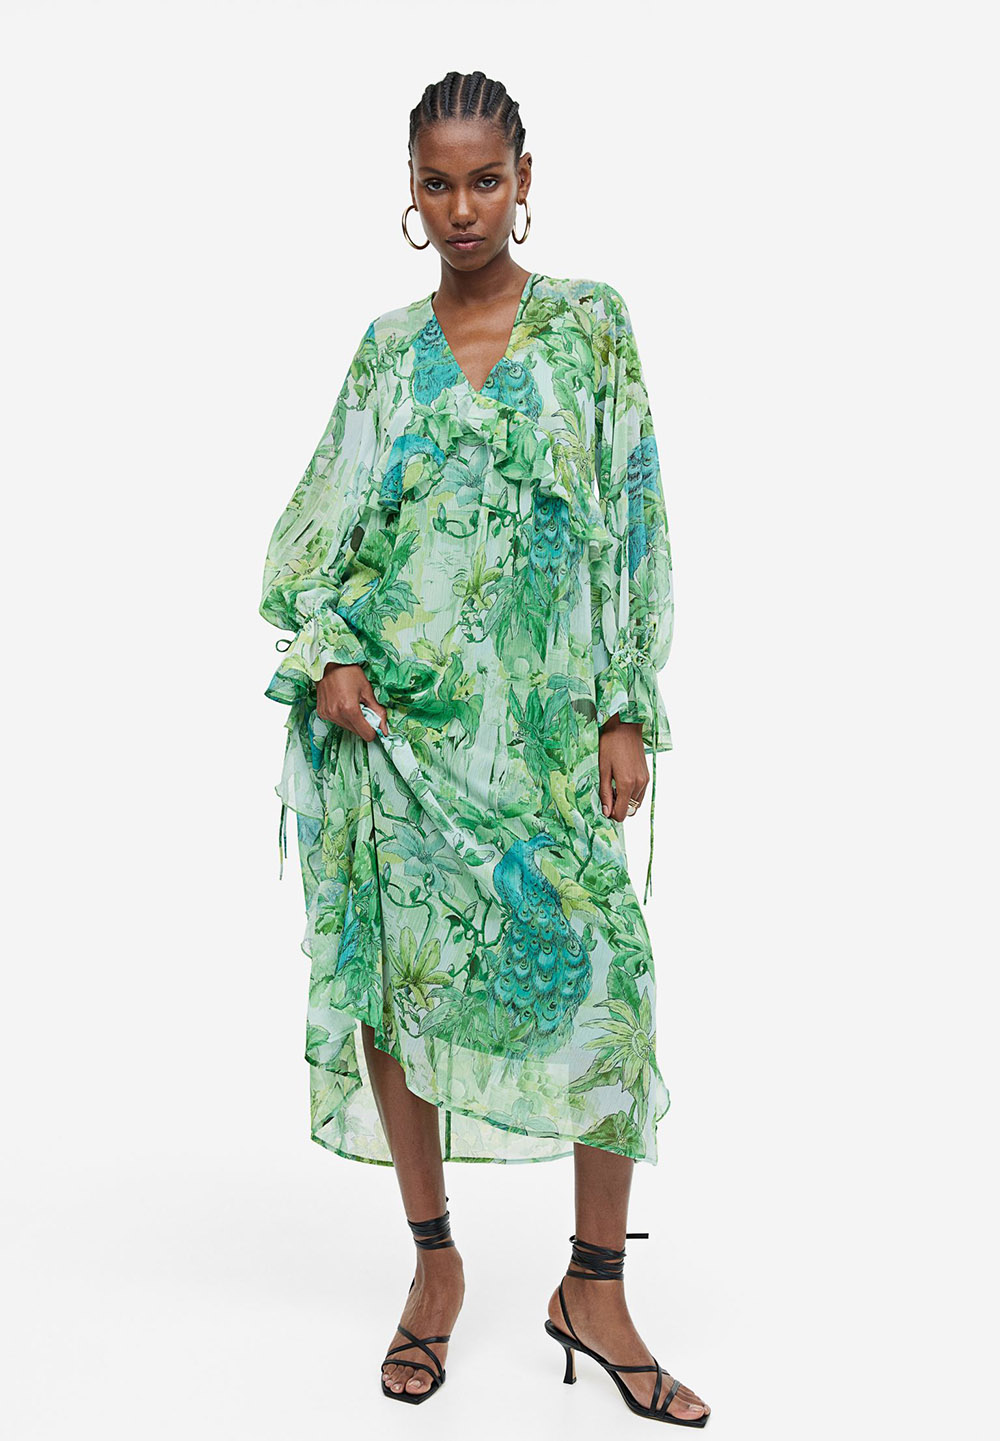 Summer Wedding Guest Outfit Ideas Under $100 I Flounce floral midi dress with 